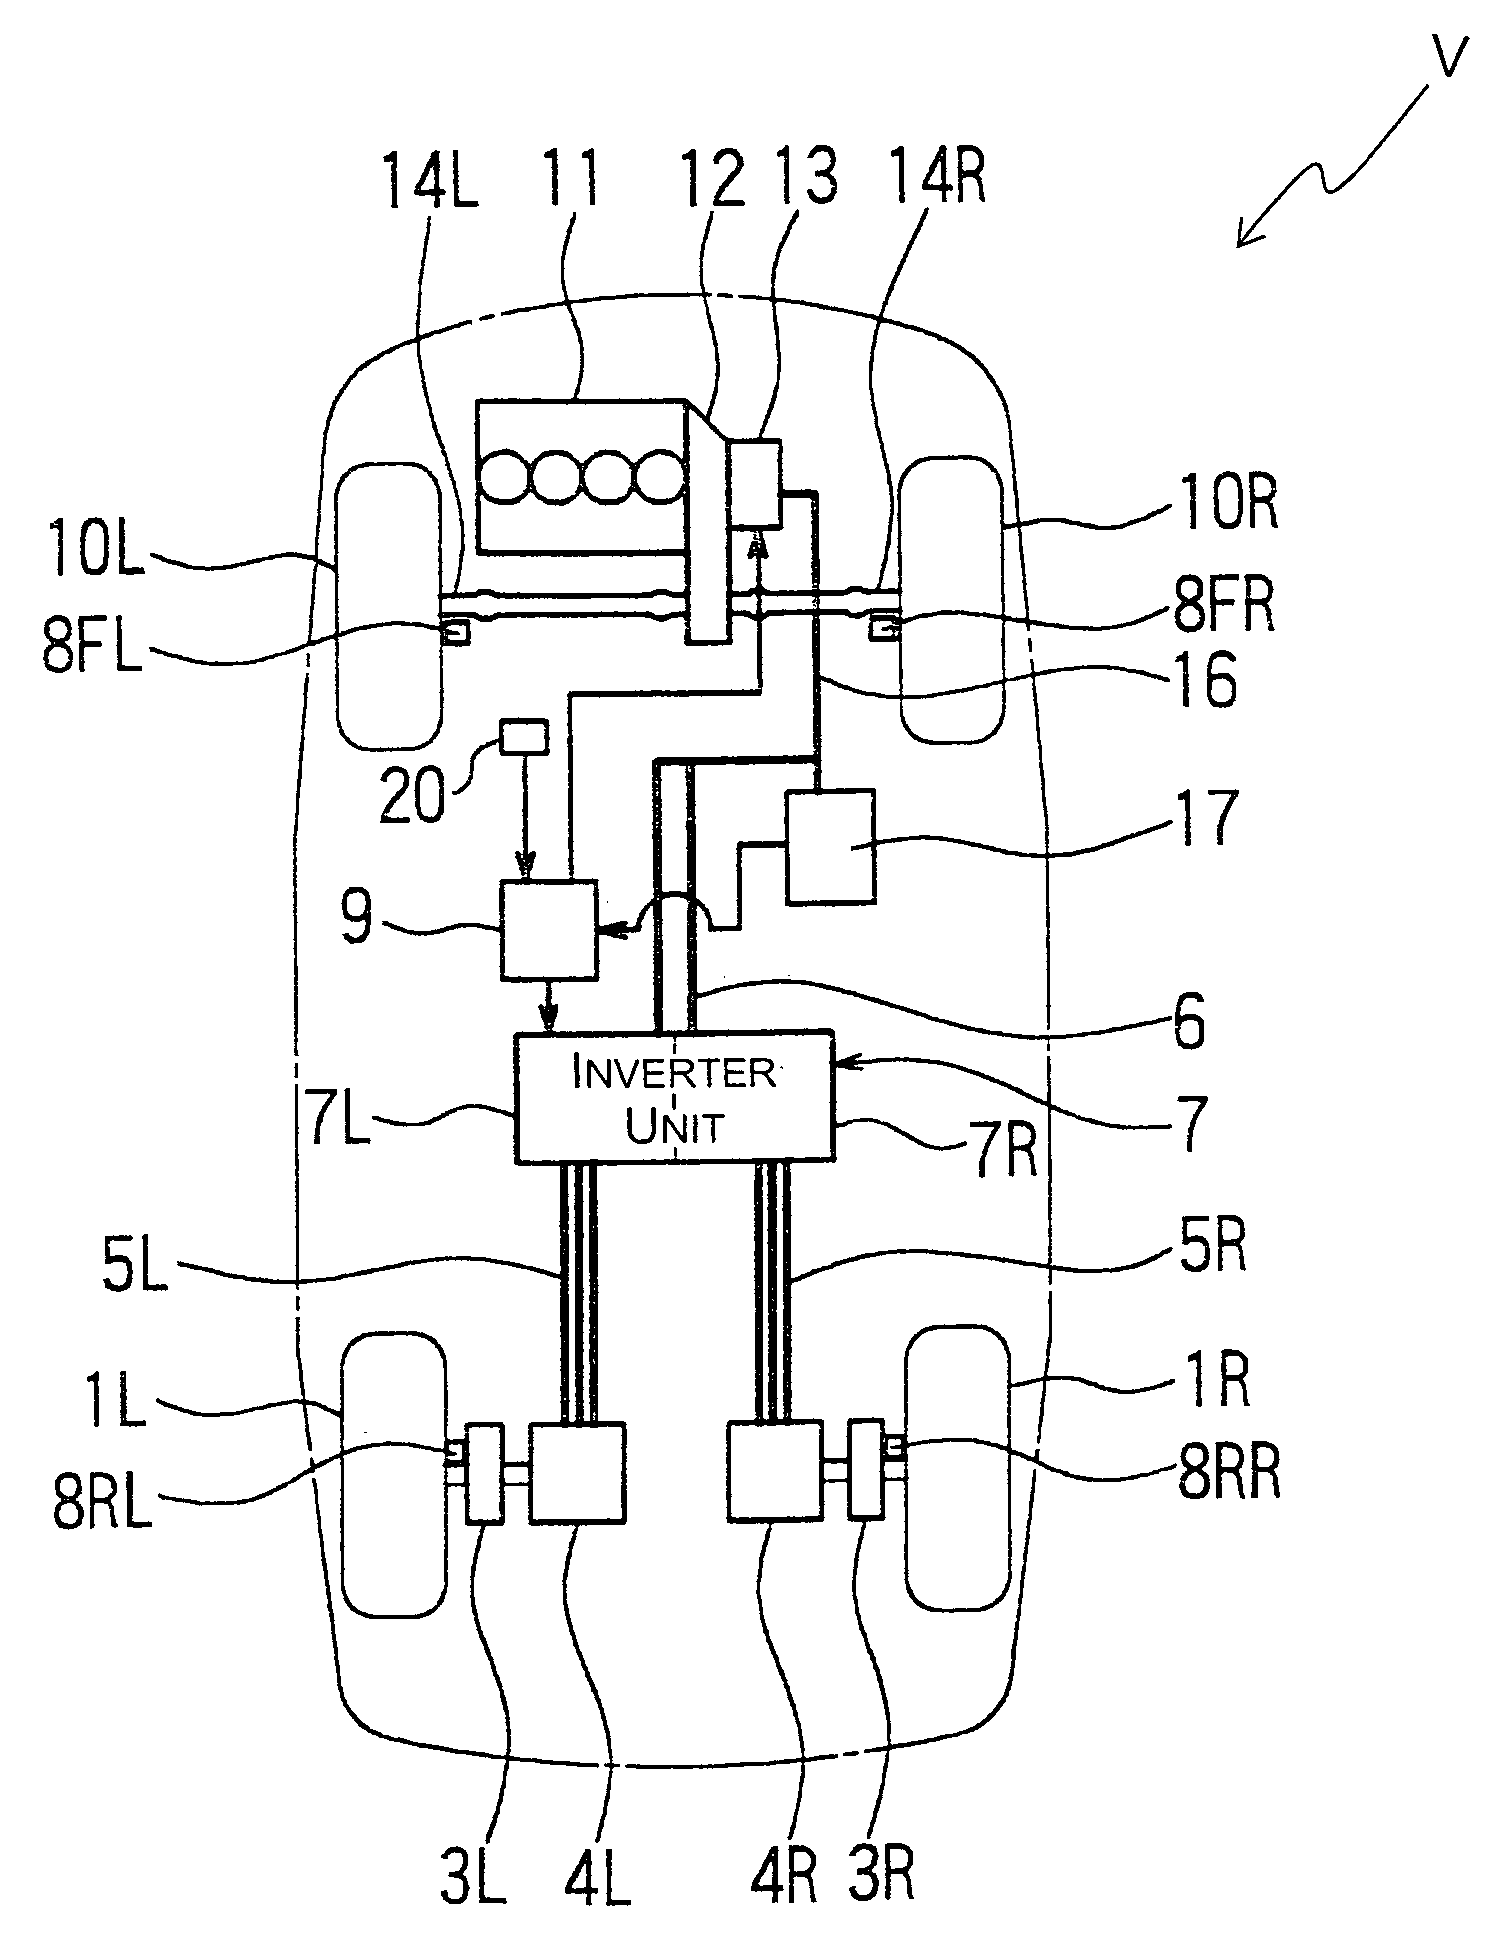 Drive apparatus for vehicle